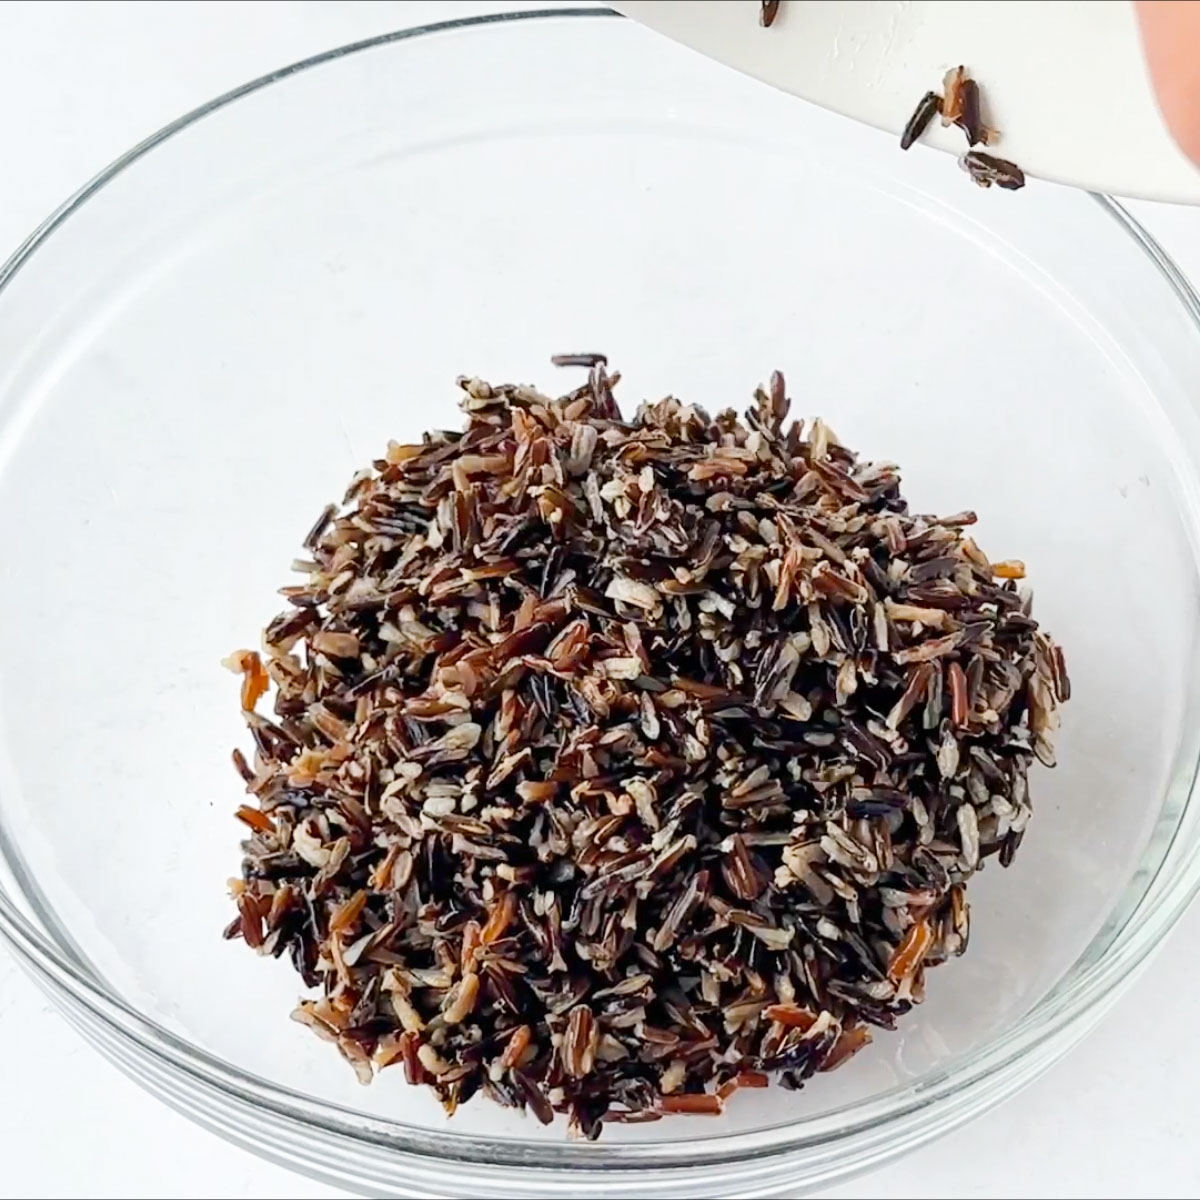 add Wild Rice to the bowl